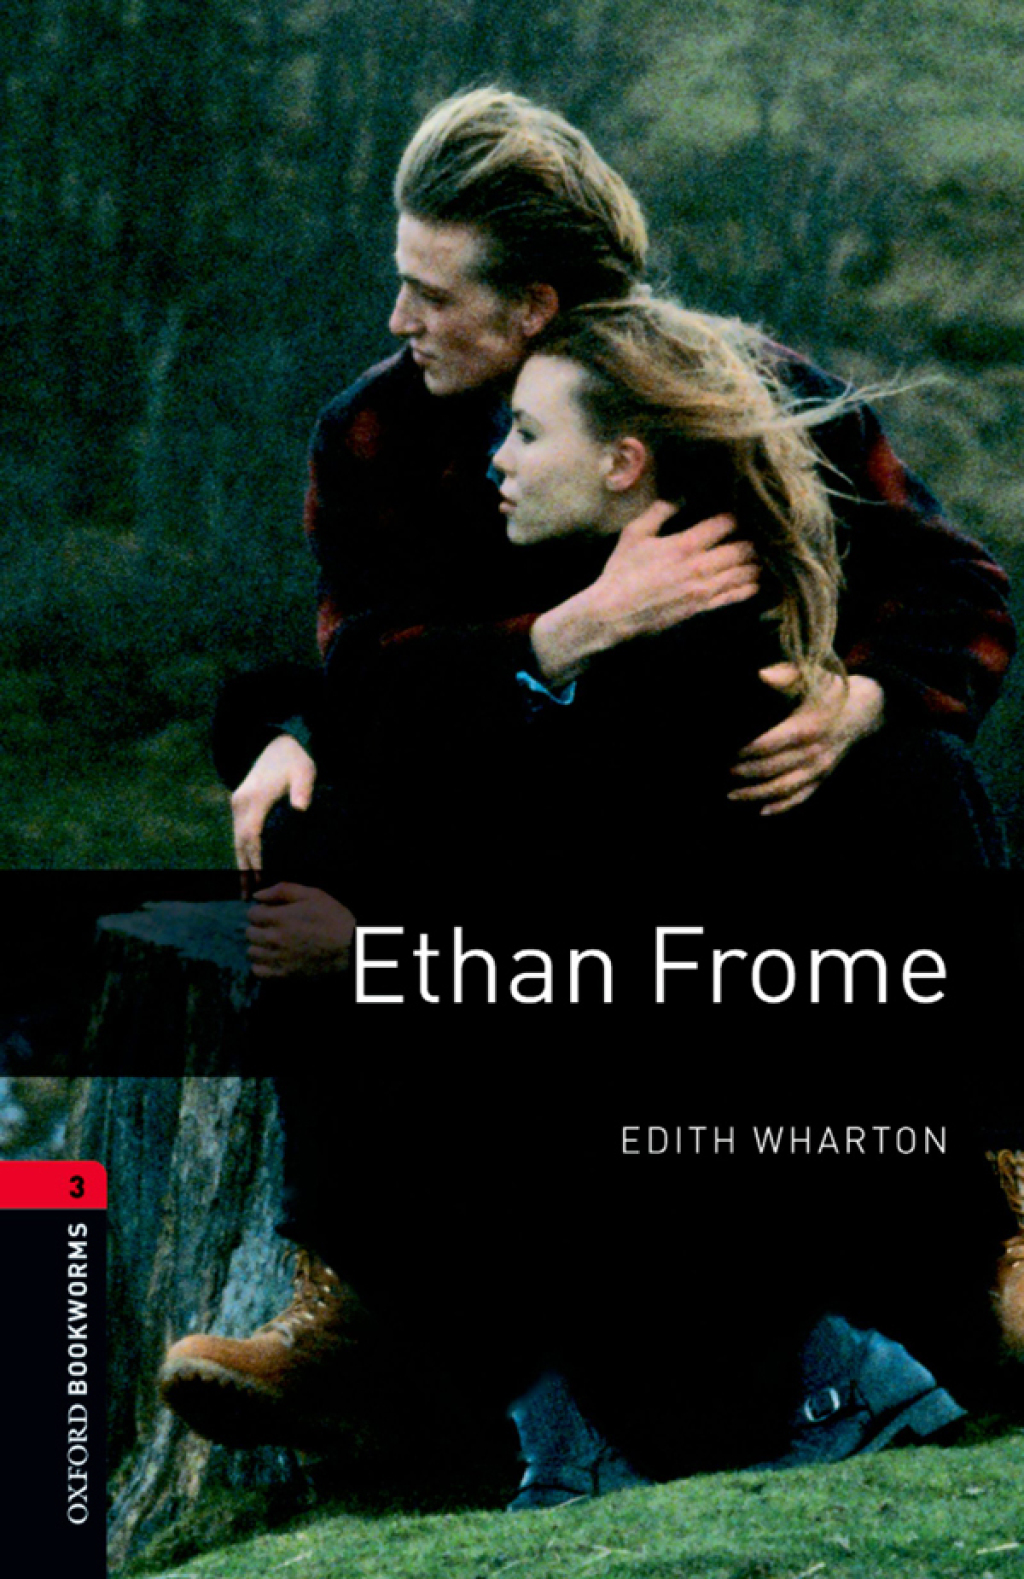 Ethan Frome Level 3 Oxford Bookworms Library - 3rd Edition (eBook Rental)